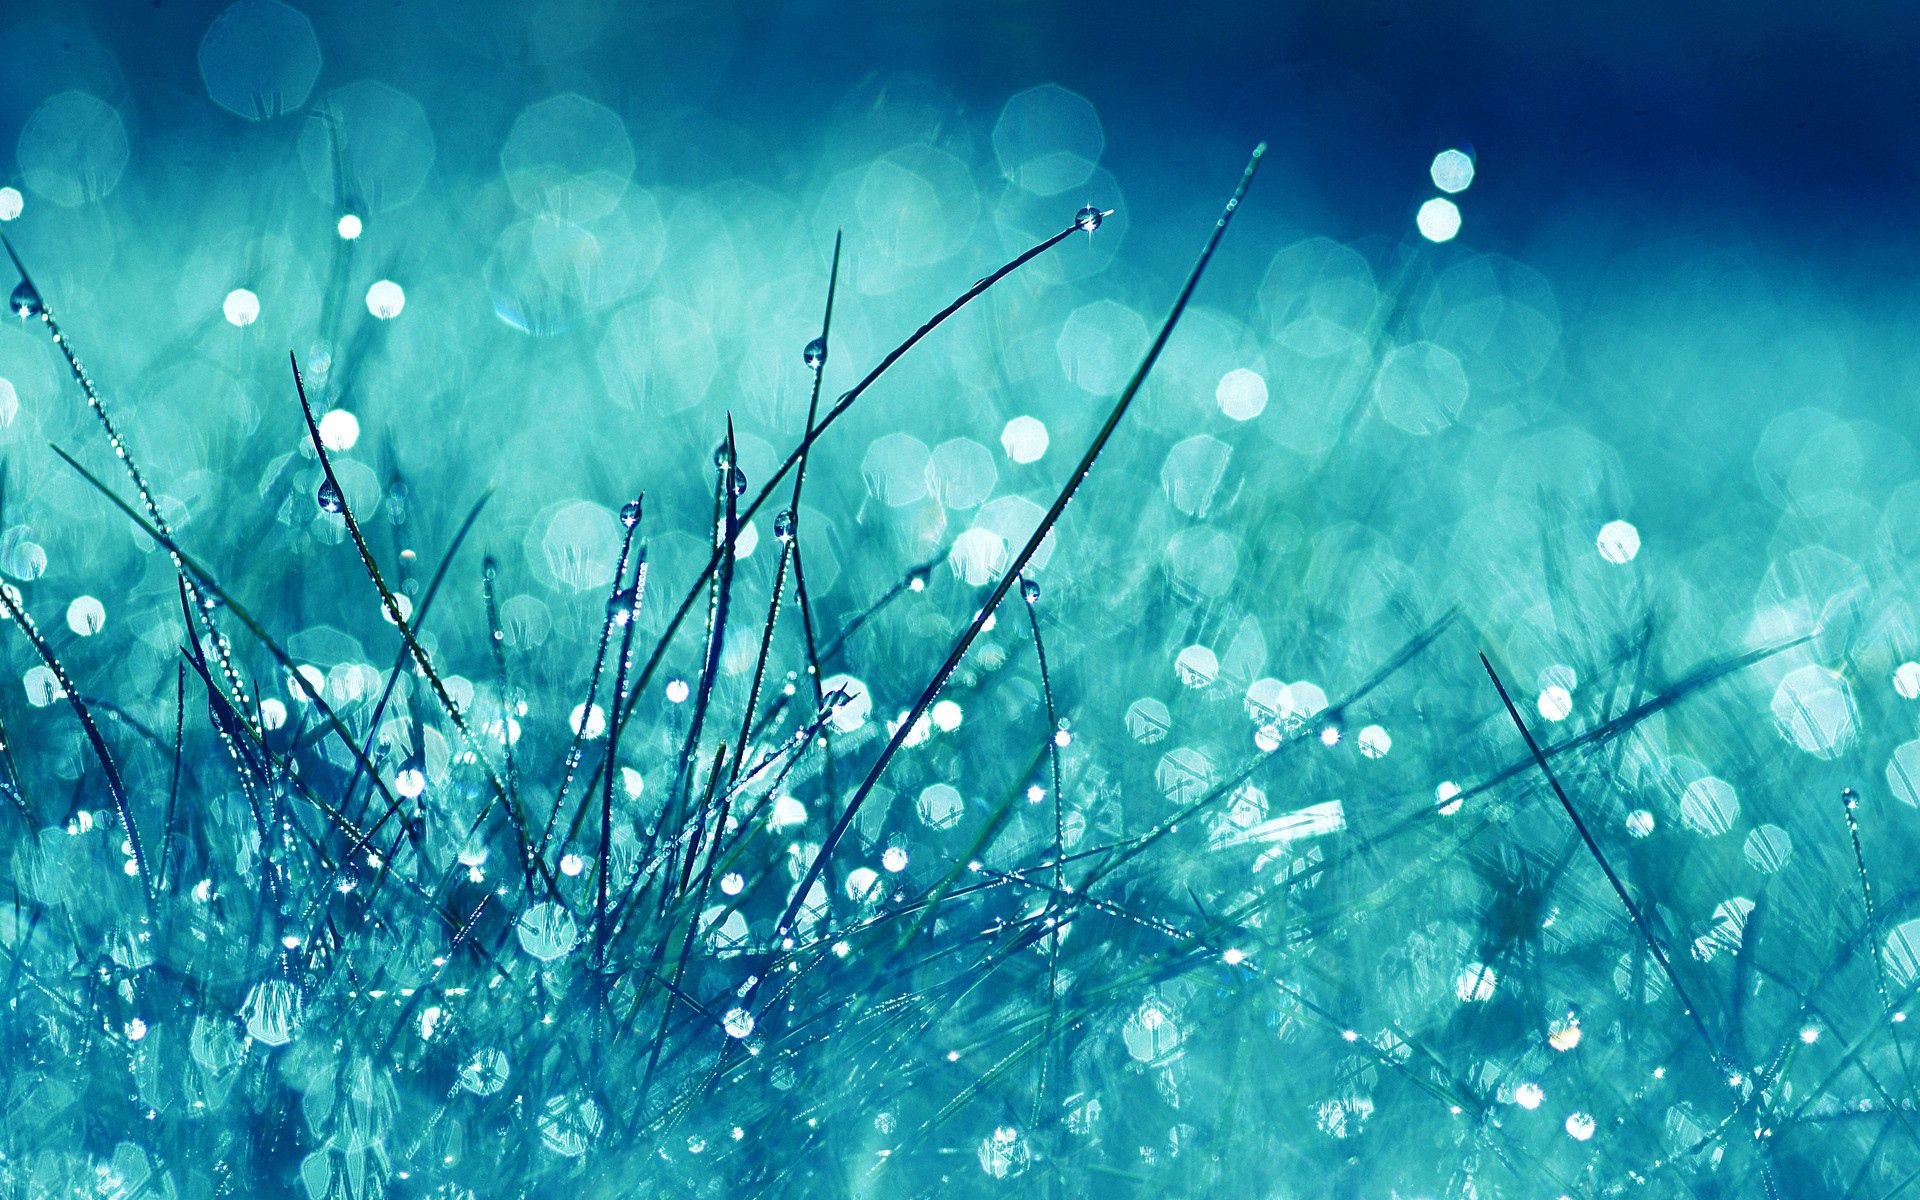 105257 download wallpaper bright, grass, macro, glare, shine, light, brilliance screensavers and pictures for free